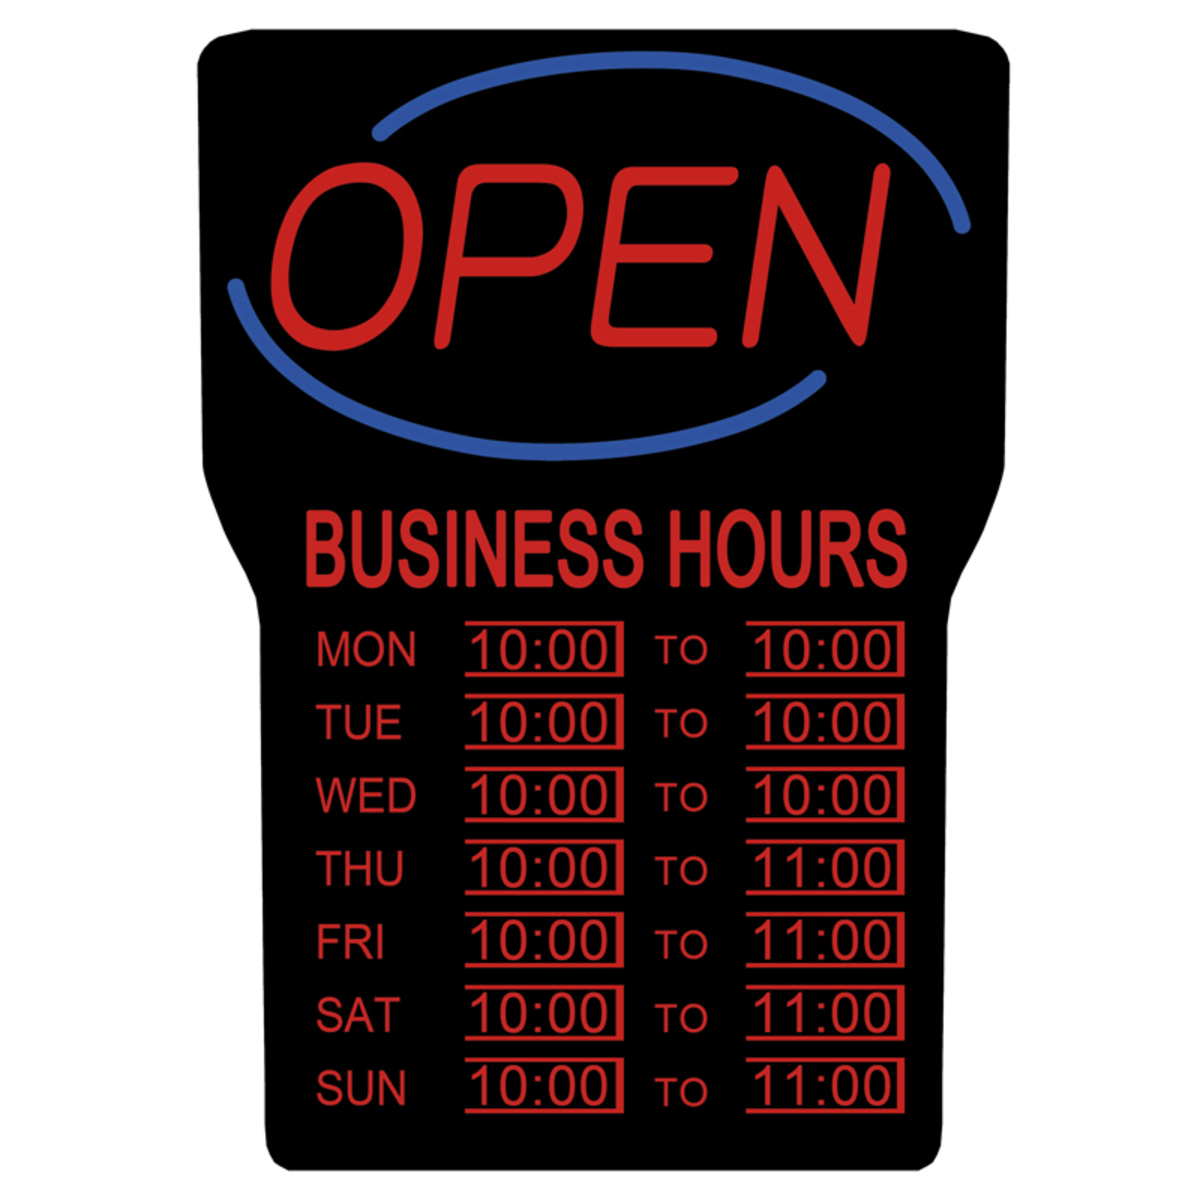 Royal Sovereign RSB-1342E LED Open Sign with Opening Times